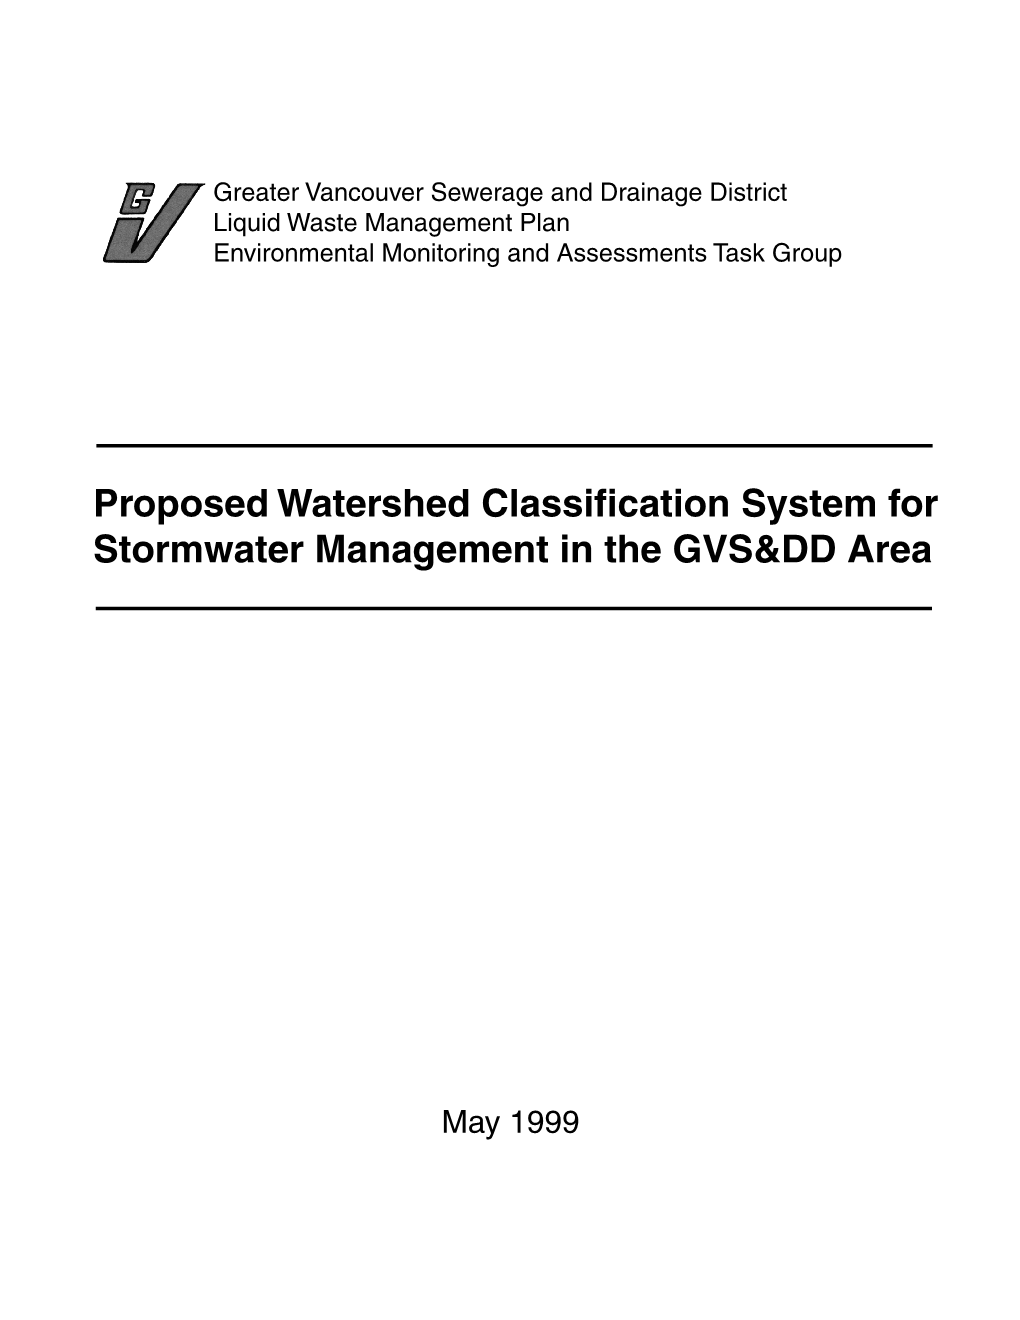 Proposed Watershed Classification System for Stormwater Management in the GVS&DD Area